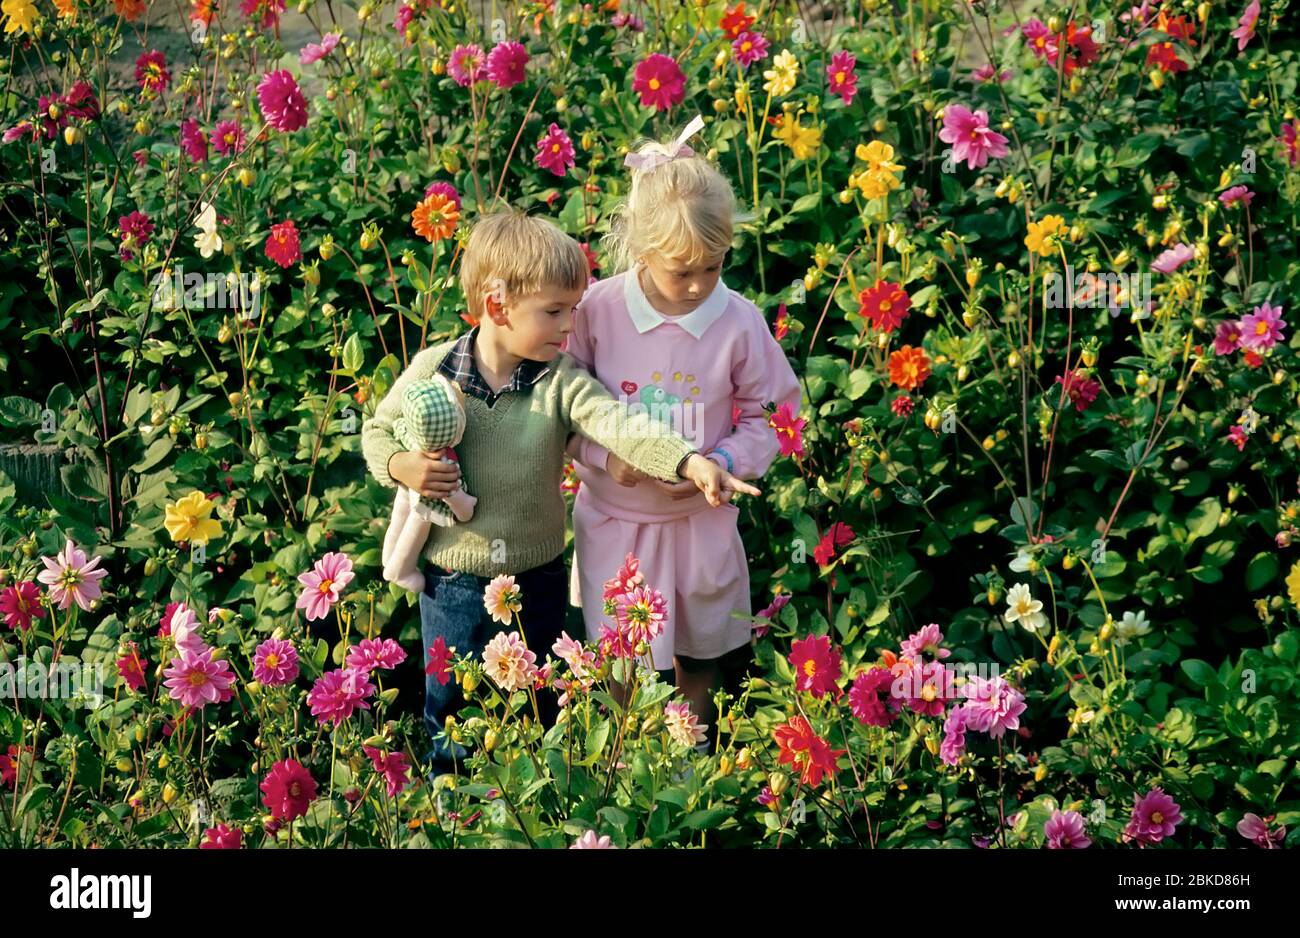 Boy and girl in flower garden with cloth doll Stock Photo